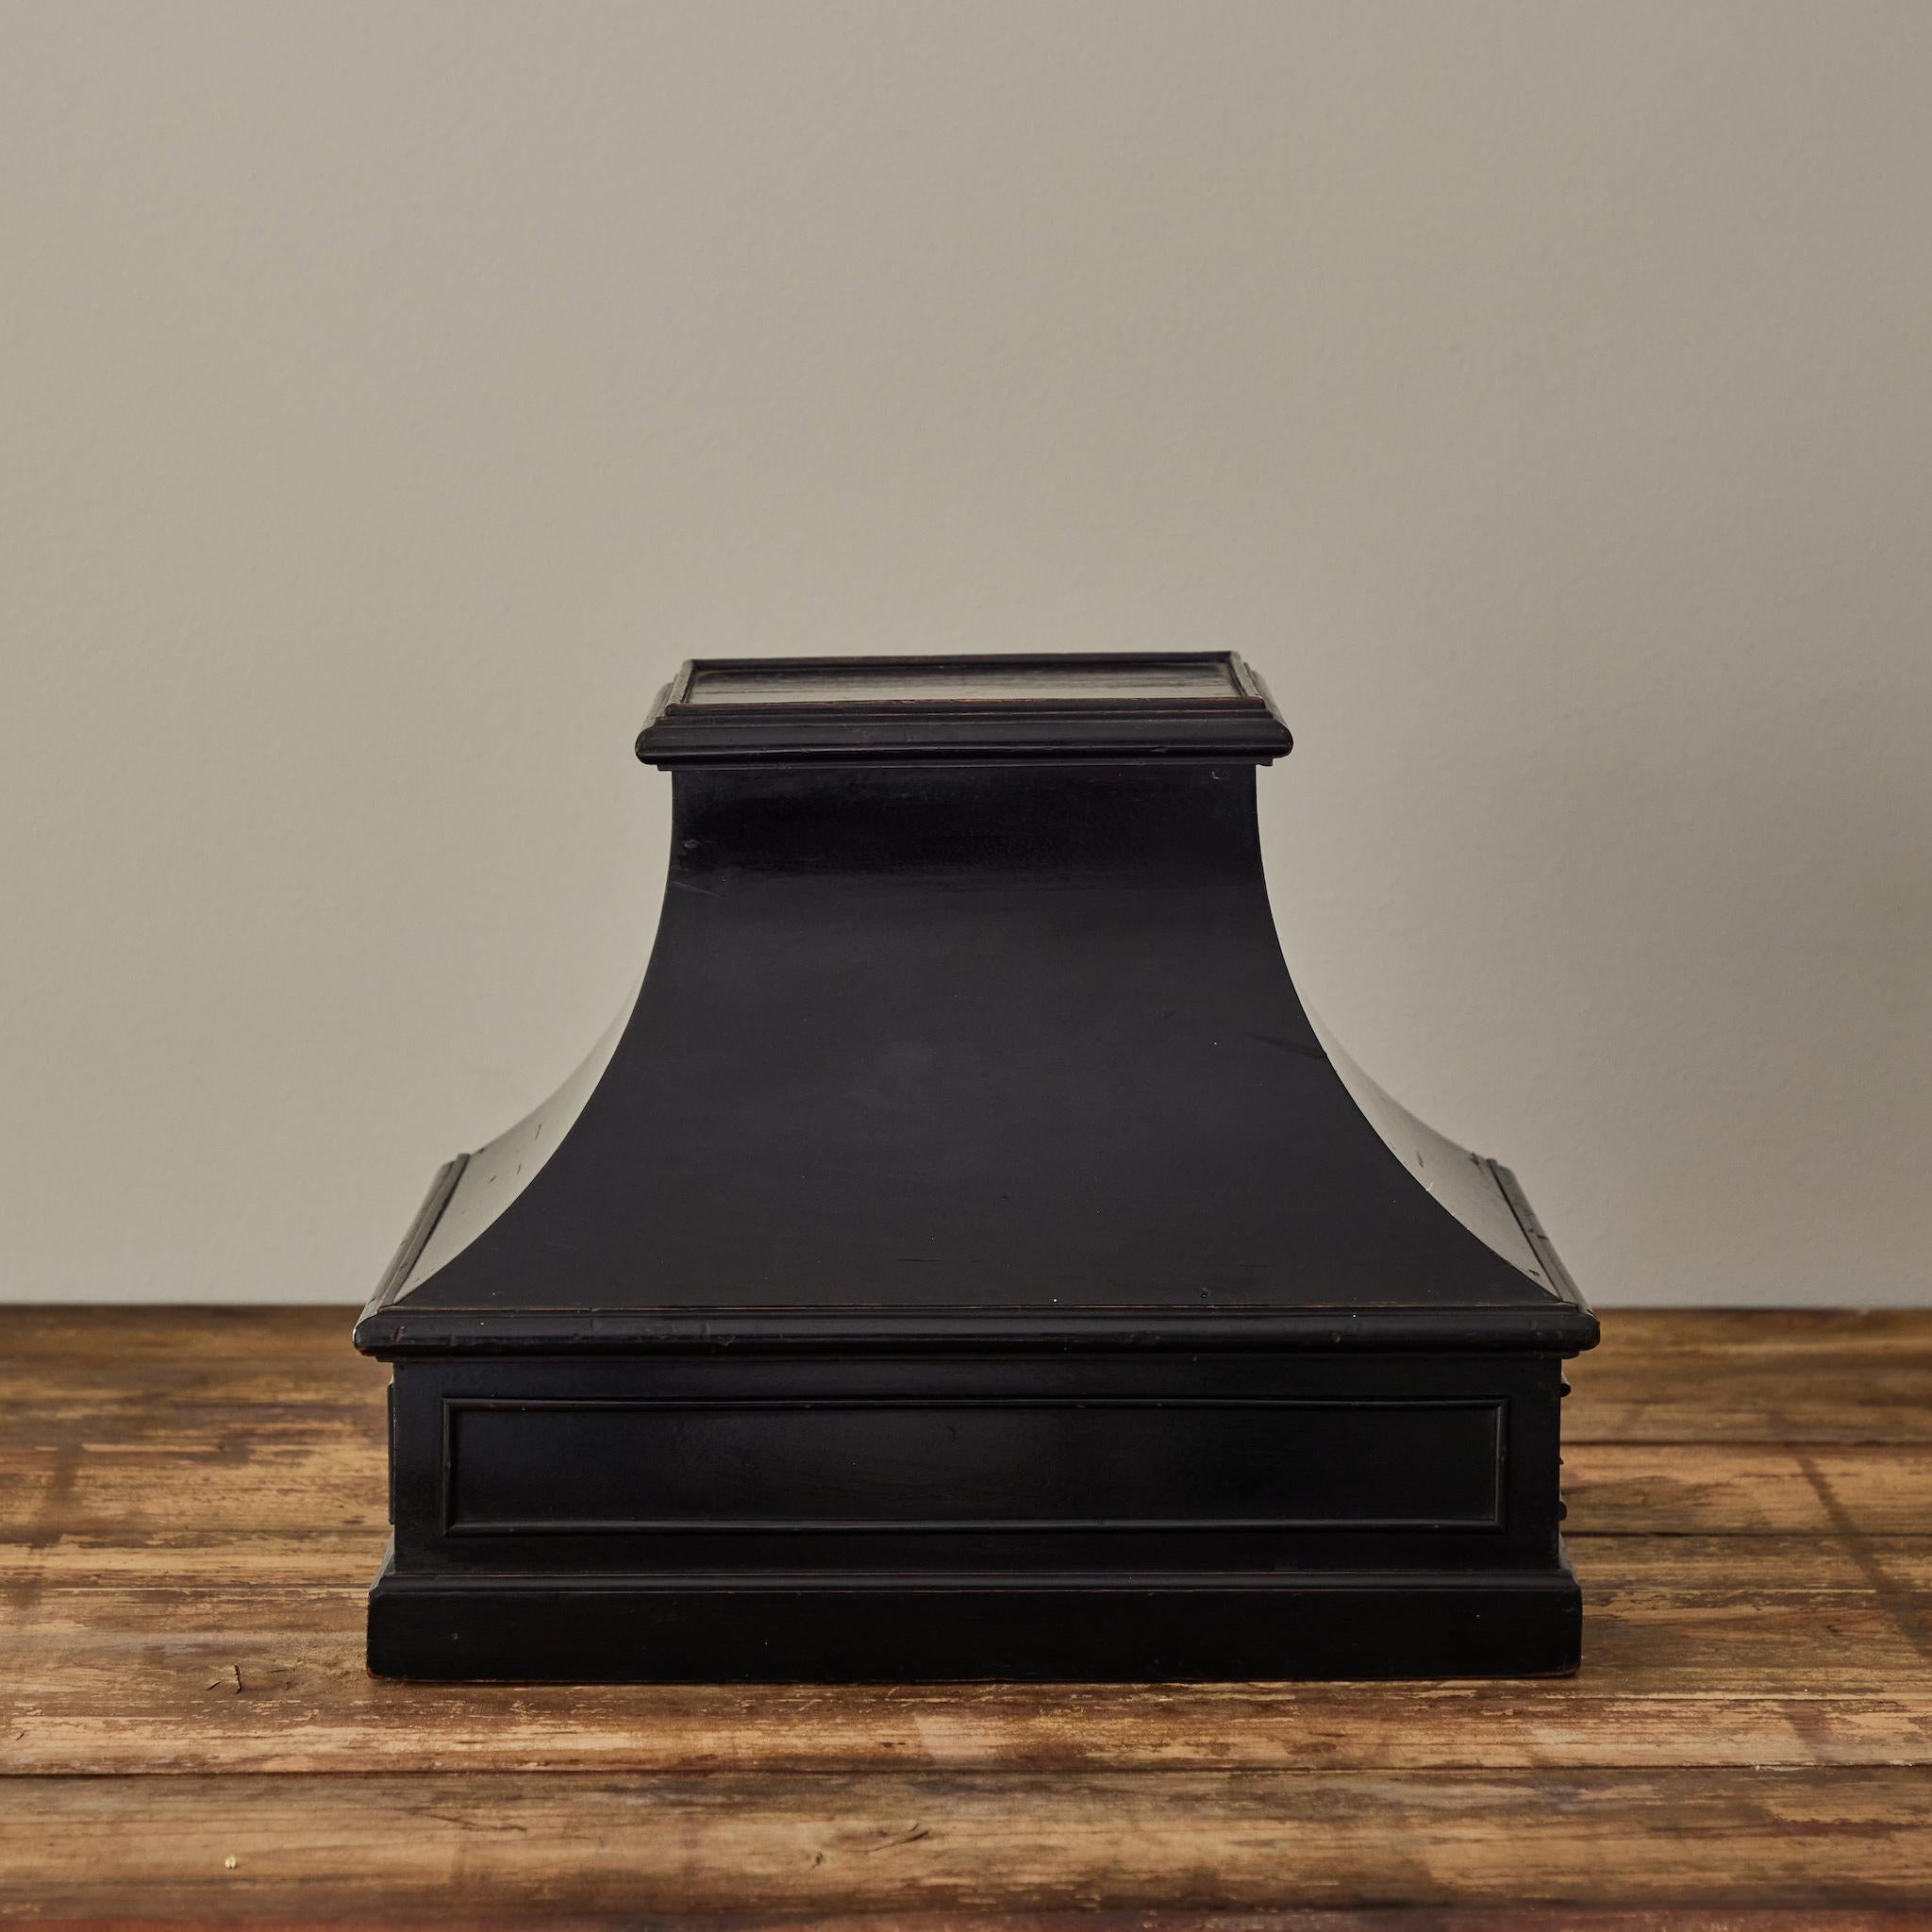 Wood Mid-19th Century Painted Black Plinth from France